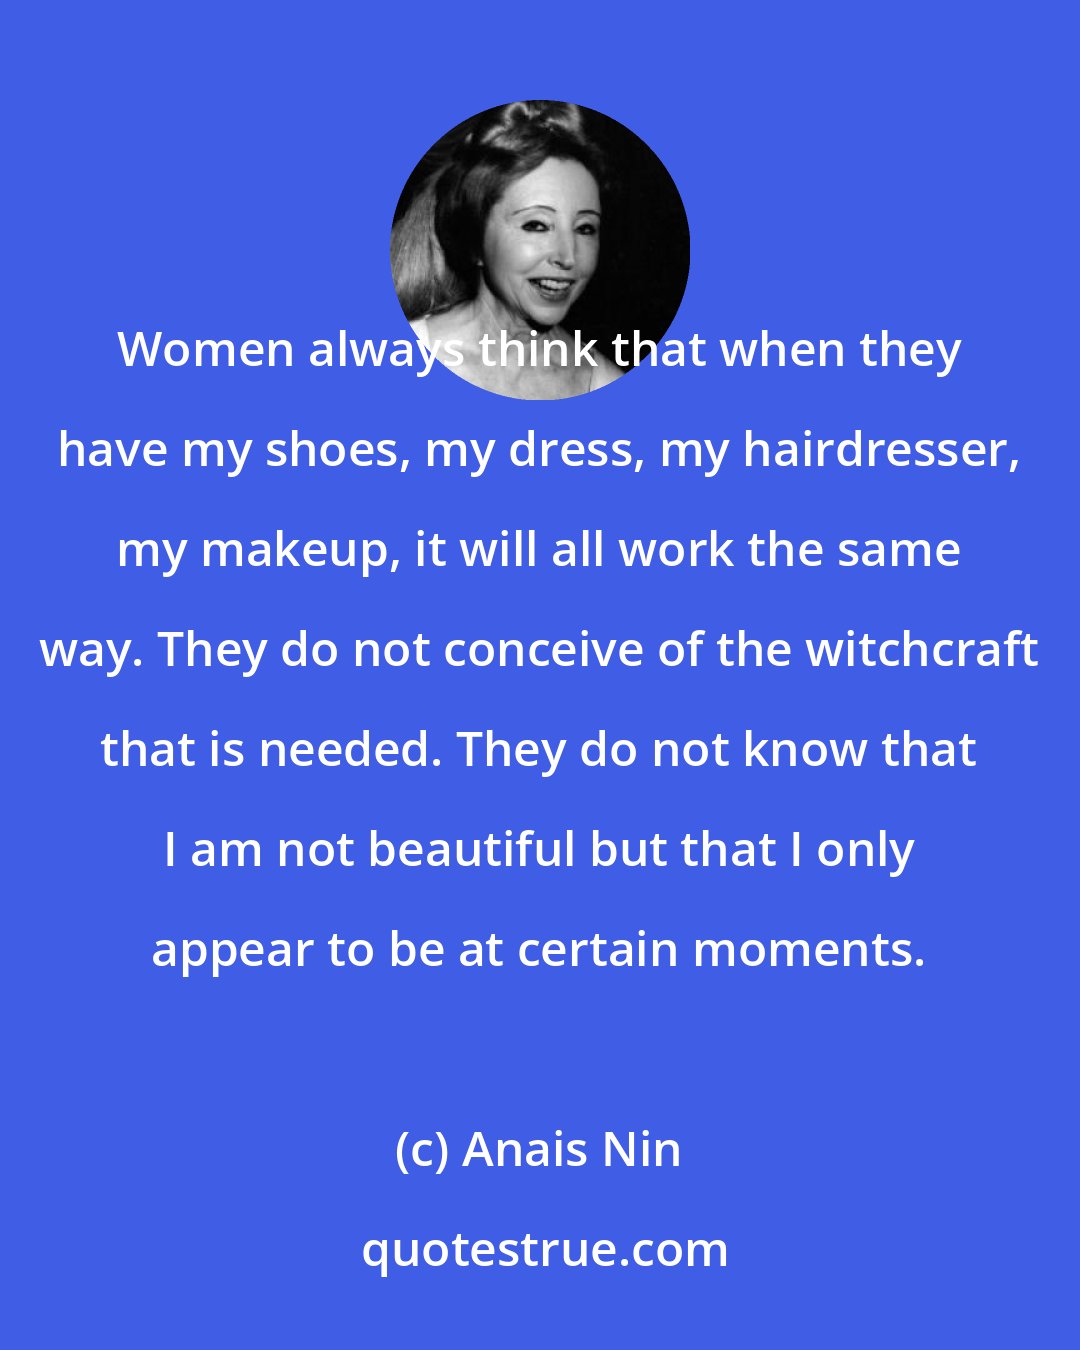 Anais Nin: Women always think that when they have my shoes, my dress, my hairdresser, my makeup, it will all work the same way. They do not conceive of the witchcraft that is needed. They do not know that I am not beautiful but that I only appear to be at certain moments.